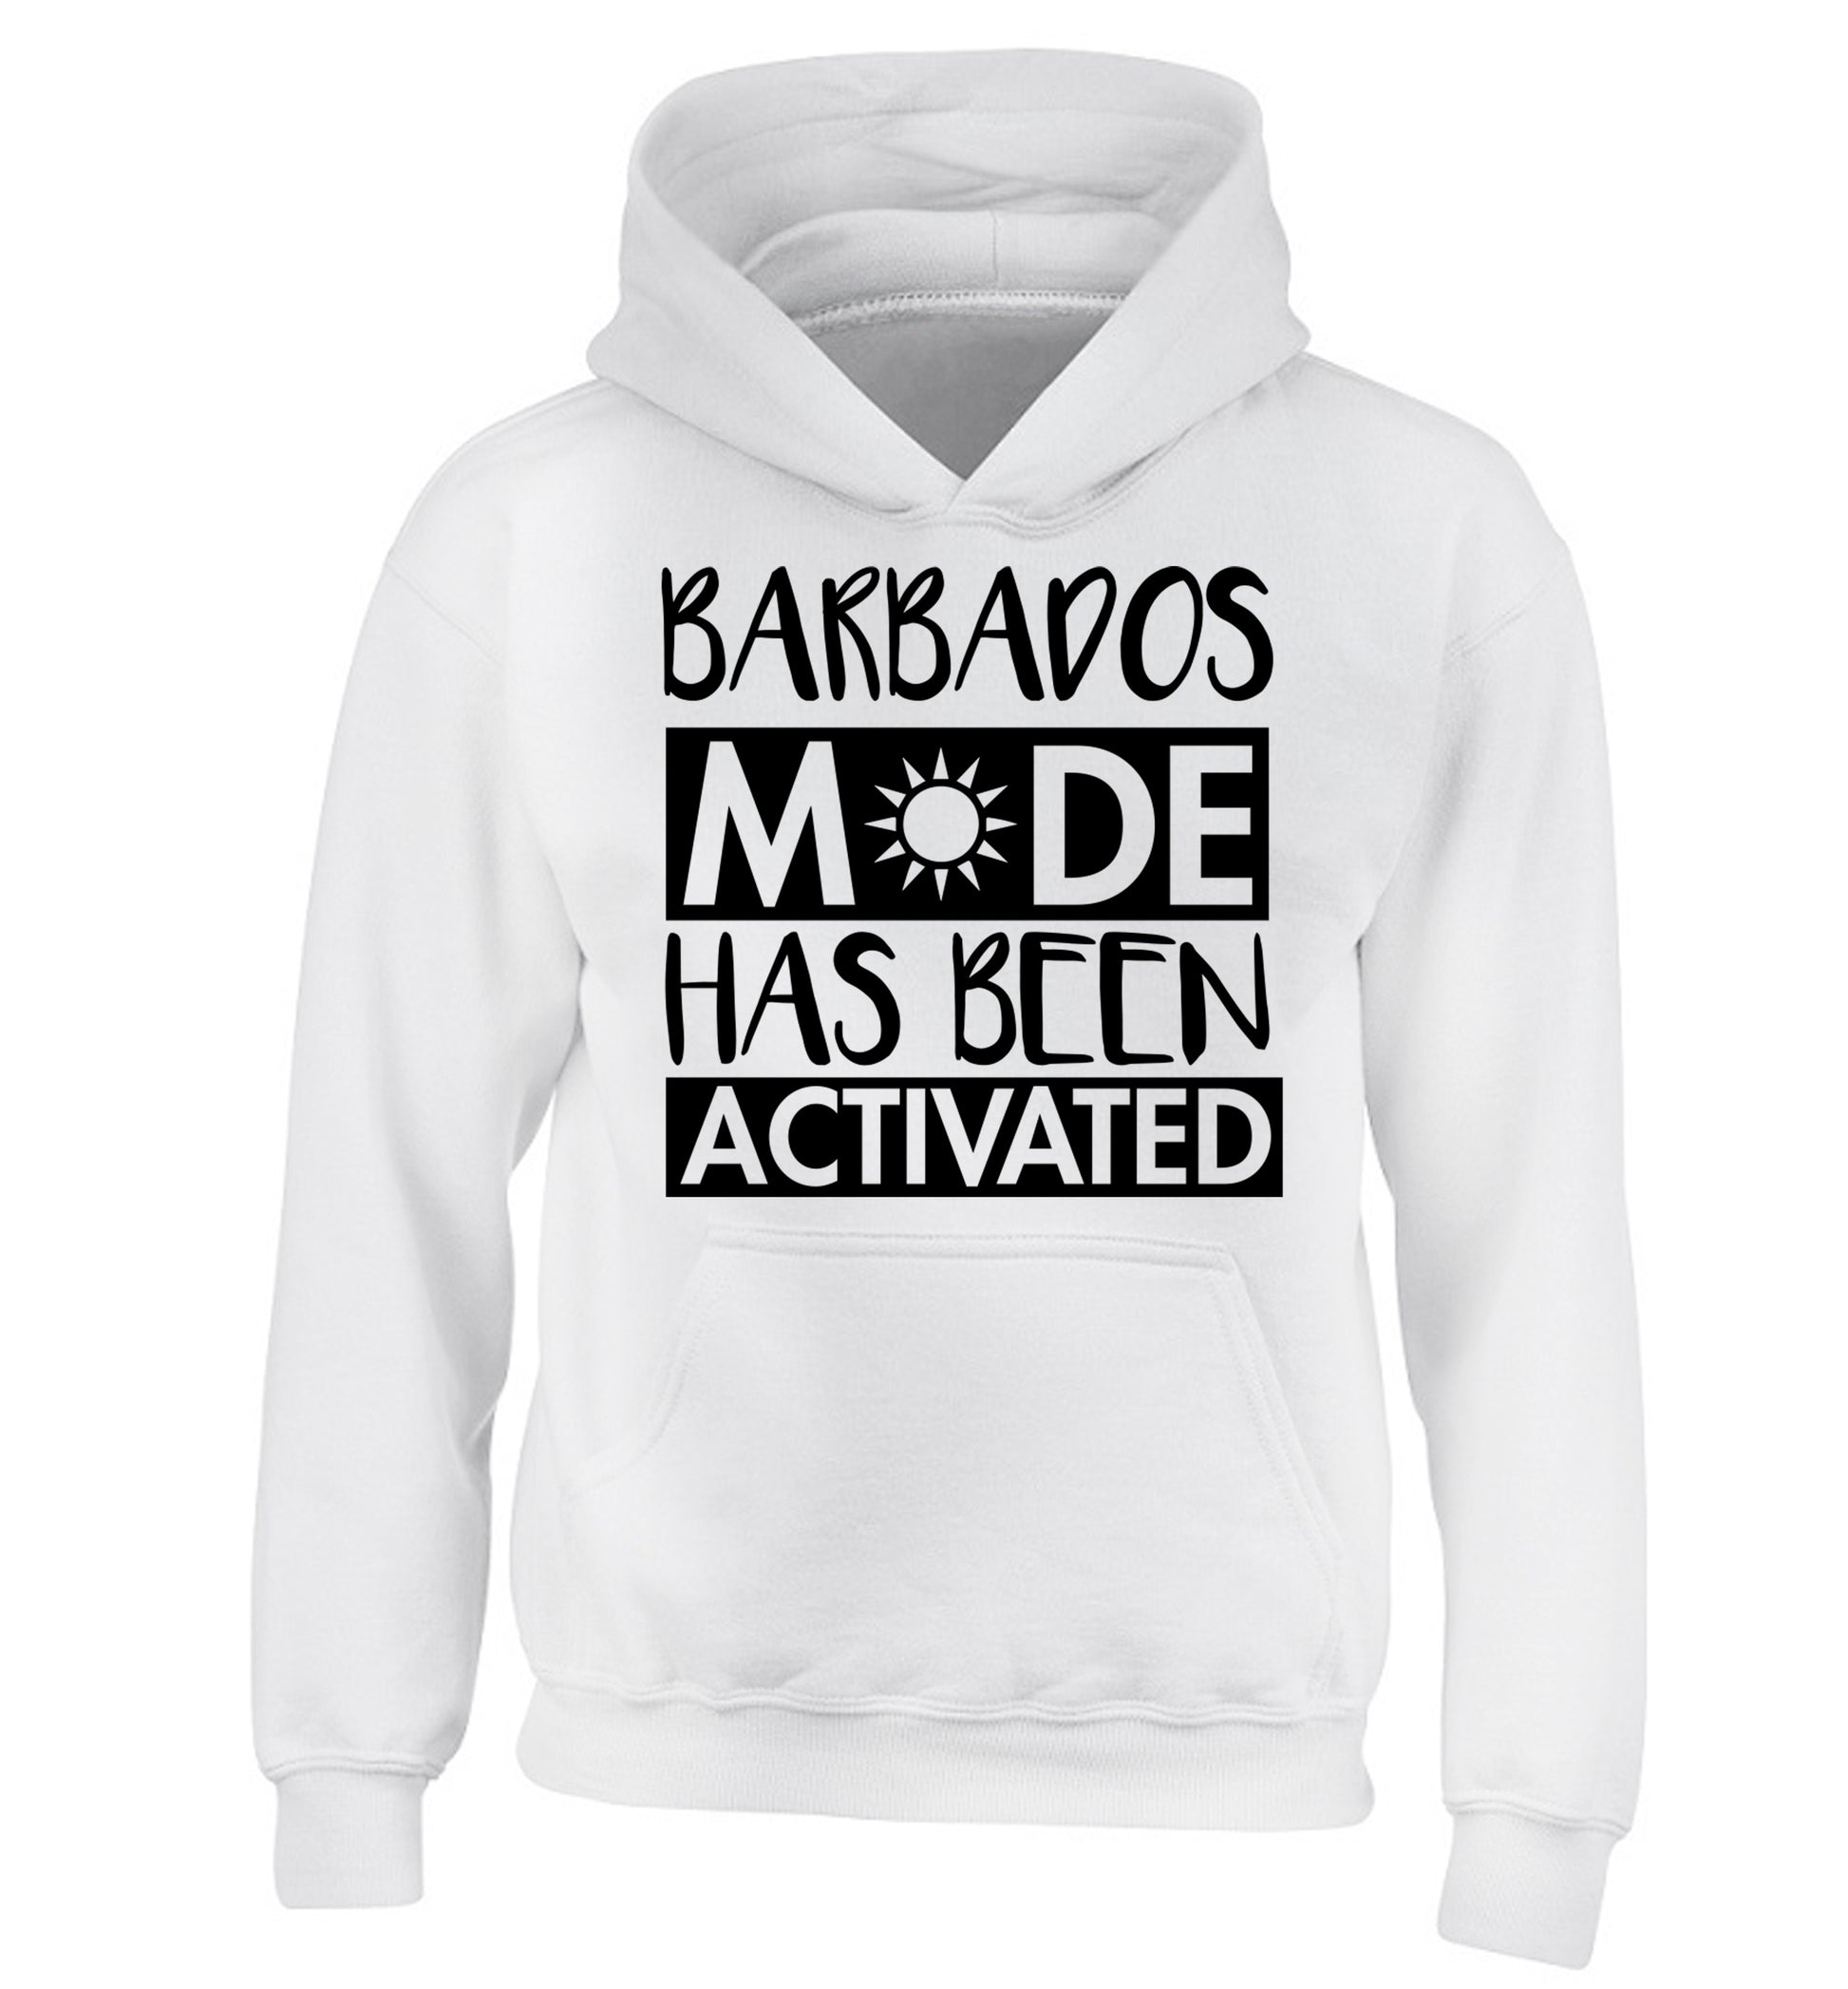 Barbados mode has been activated children's white hoodie 12-13 Years